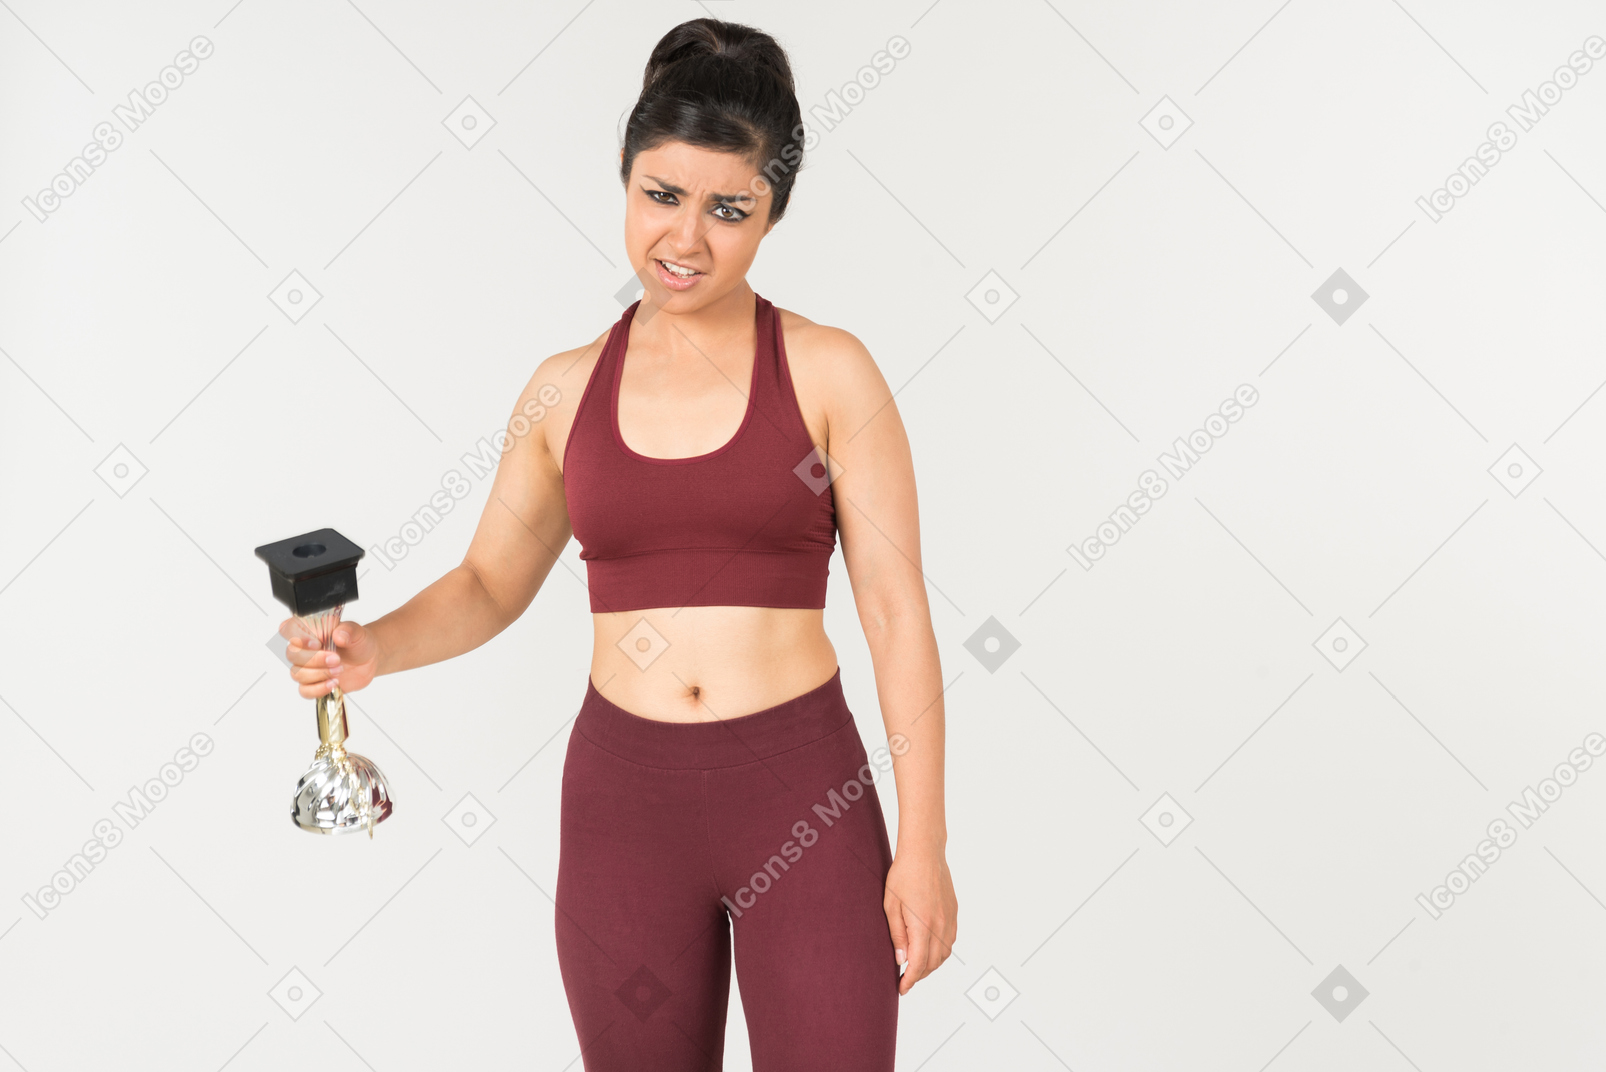 Serious looking young indian woman in sporstwear holding award